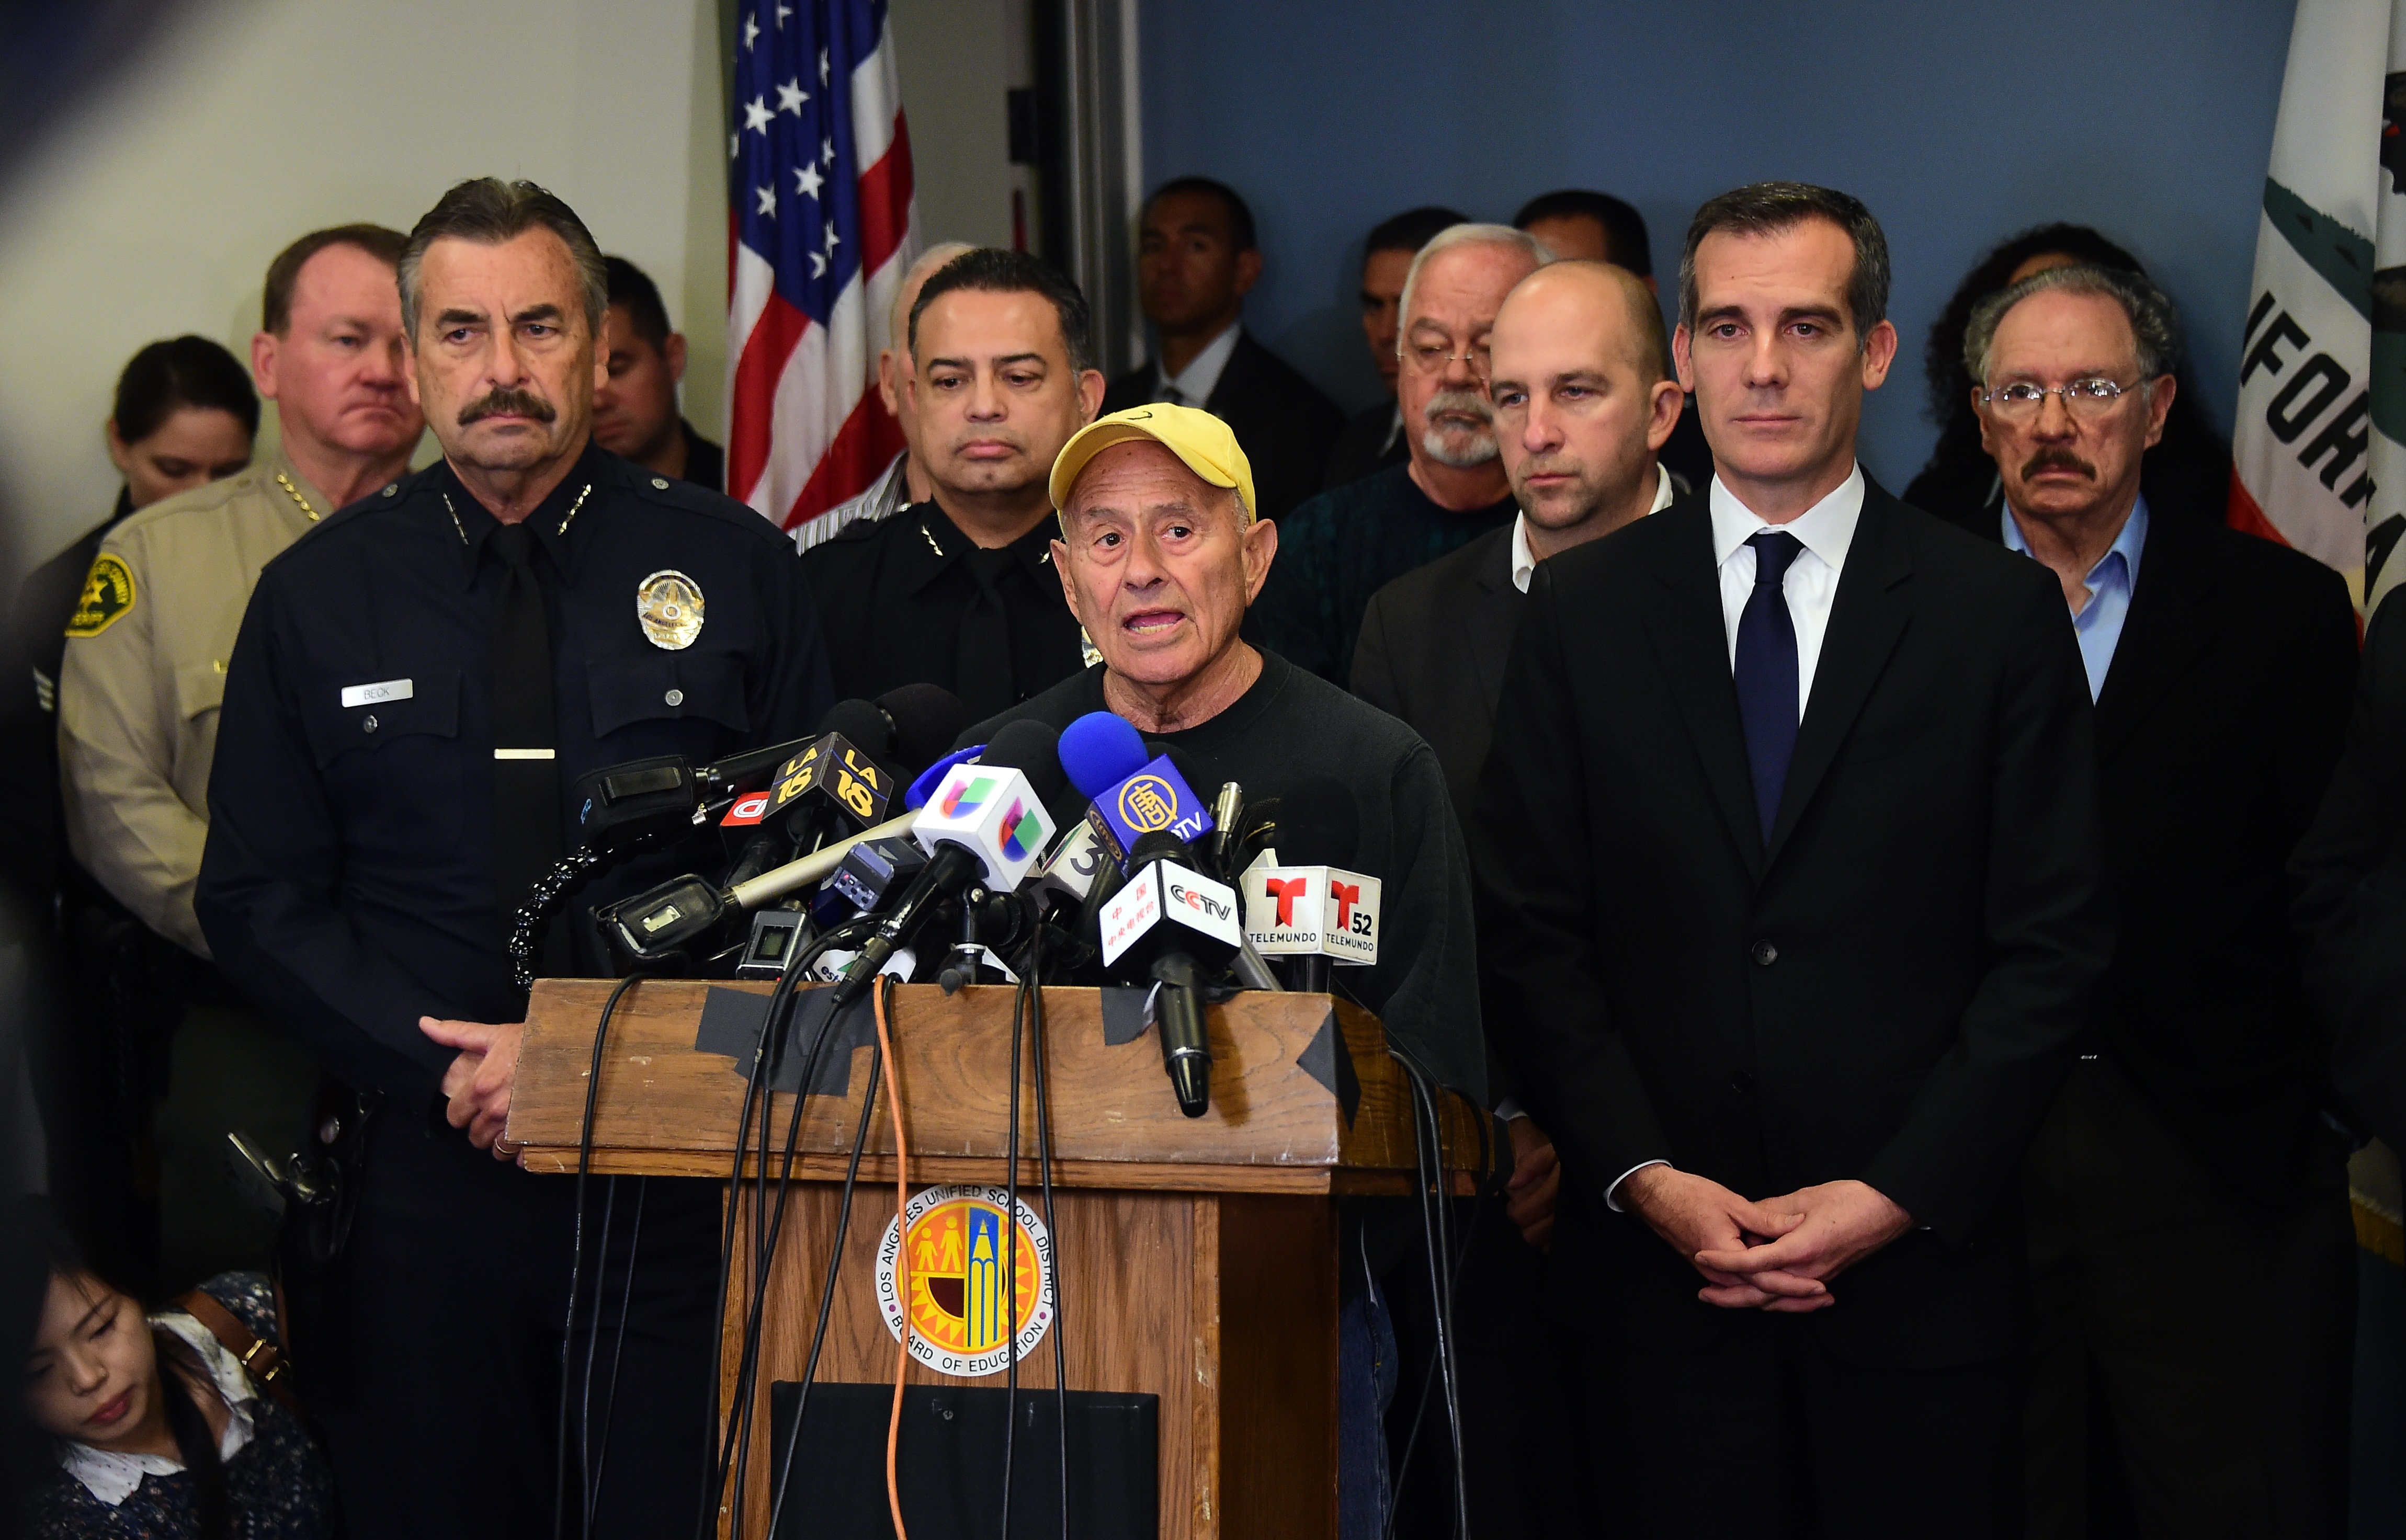 Los Angeles Unified School District Superintendant Ramon Cortines addresses the media in Los Angeles, California on December 15, 2015 along with other city officials. (Getty)